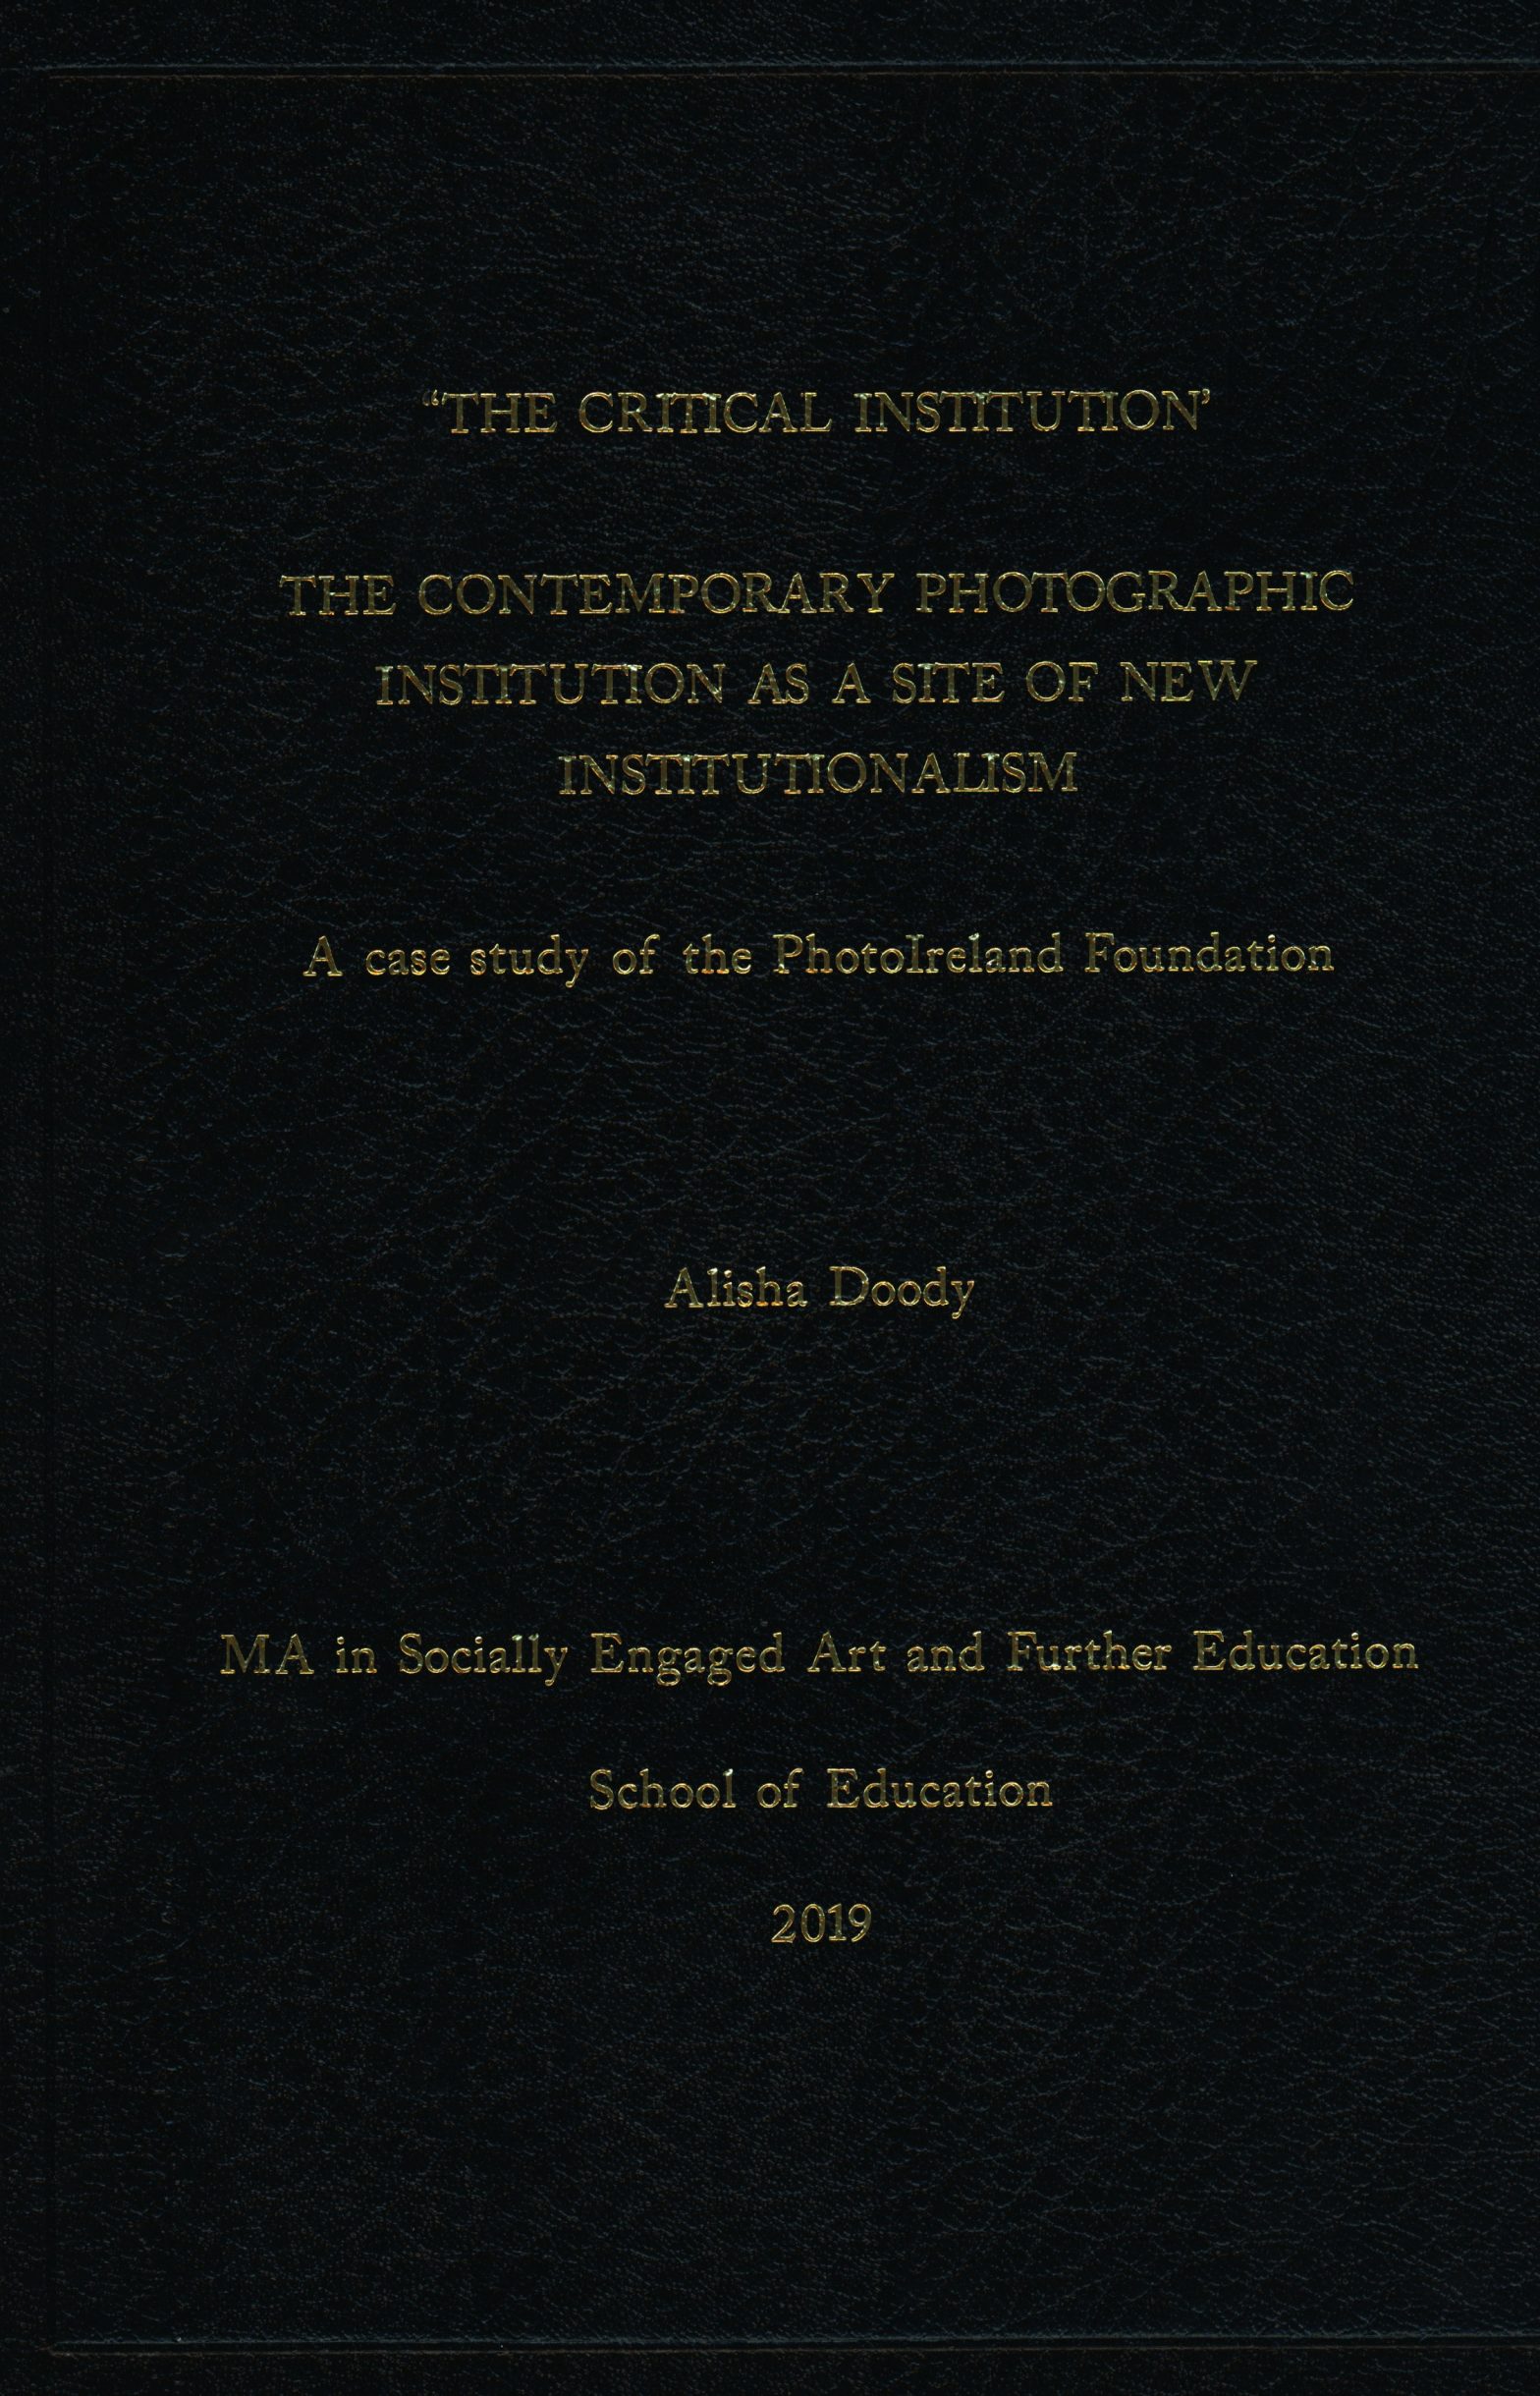 'The Critical Institution' The Contemporary Photographic Institution as a Site of New Institutionalism: A Case Study of the PhotoIreland Foundation Alisha Doody